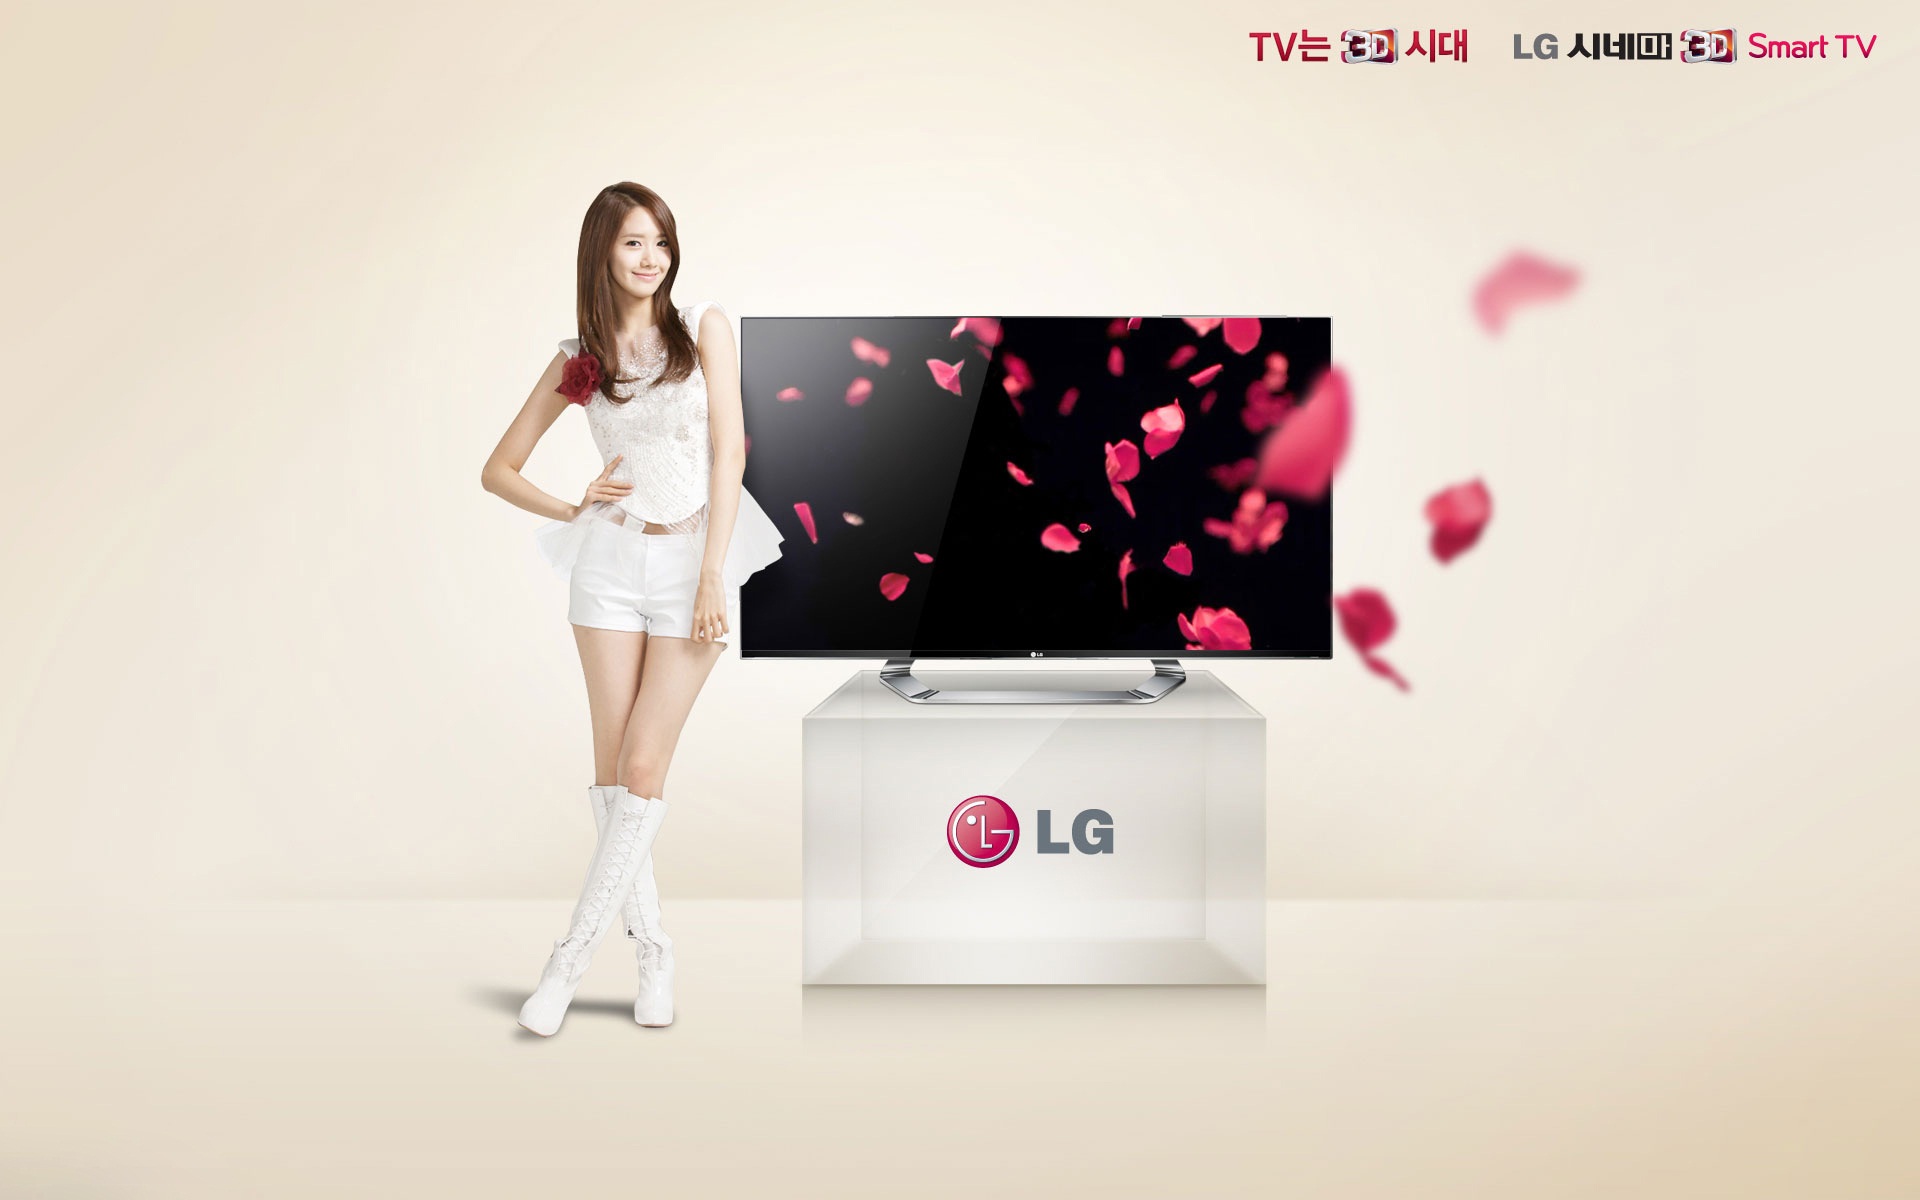 Girls Generation ACE and LG endorsements ads HD wallpapers #20 - 1920x1200